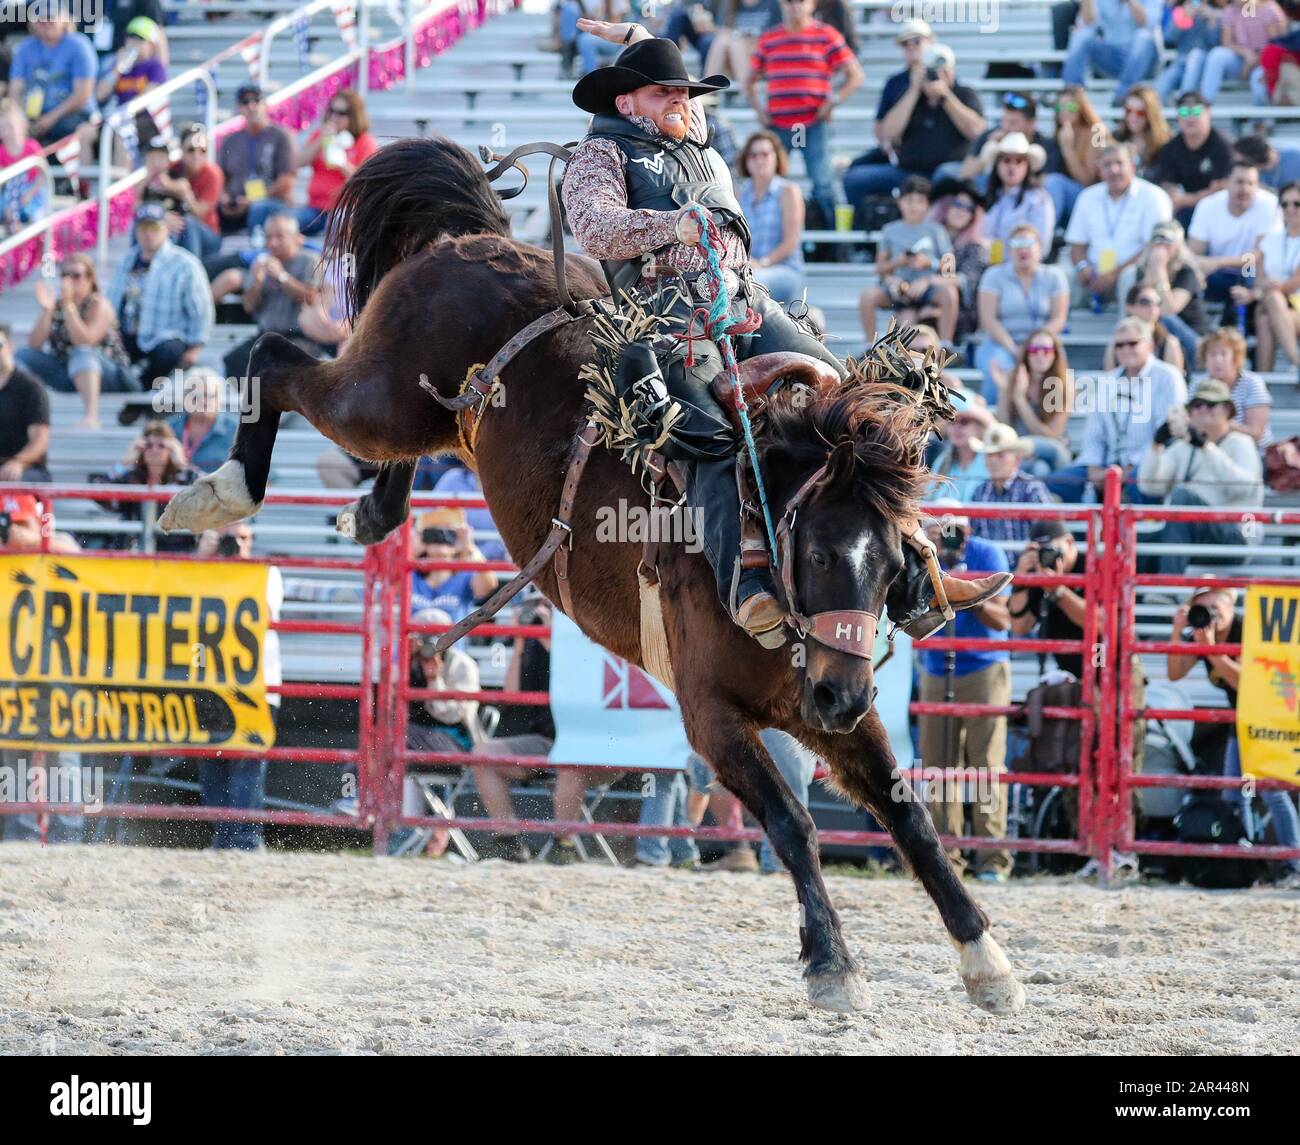 Homestead, Florida, USA. 25th Jan, 2020. Kody Rinehart competes in the Saddle Bronc Riding event during the 71st Homestead Championship Rodeo at the Doc DeMilly Rodeo Arena at Harris Field in Homestead, Florida. Mario Houben/CSM/Alamy Live News Stock Photo